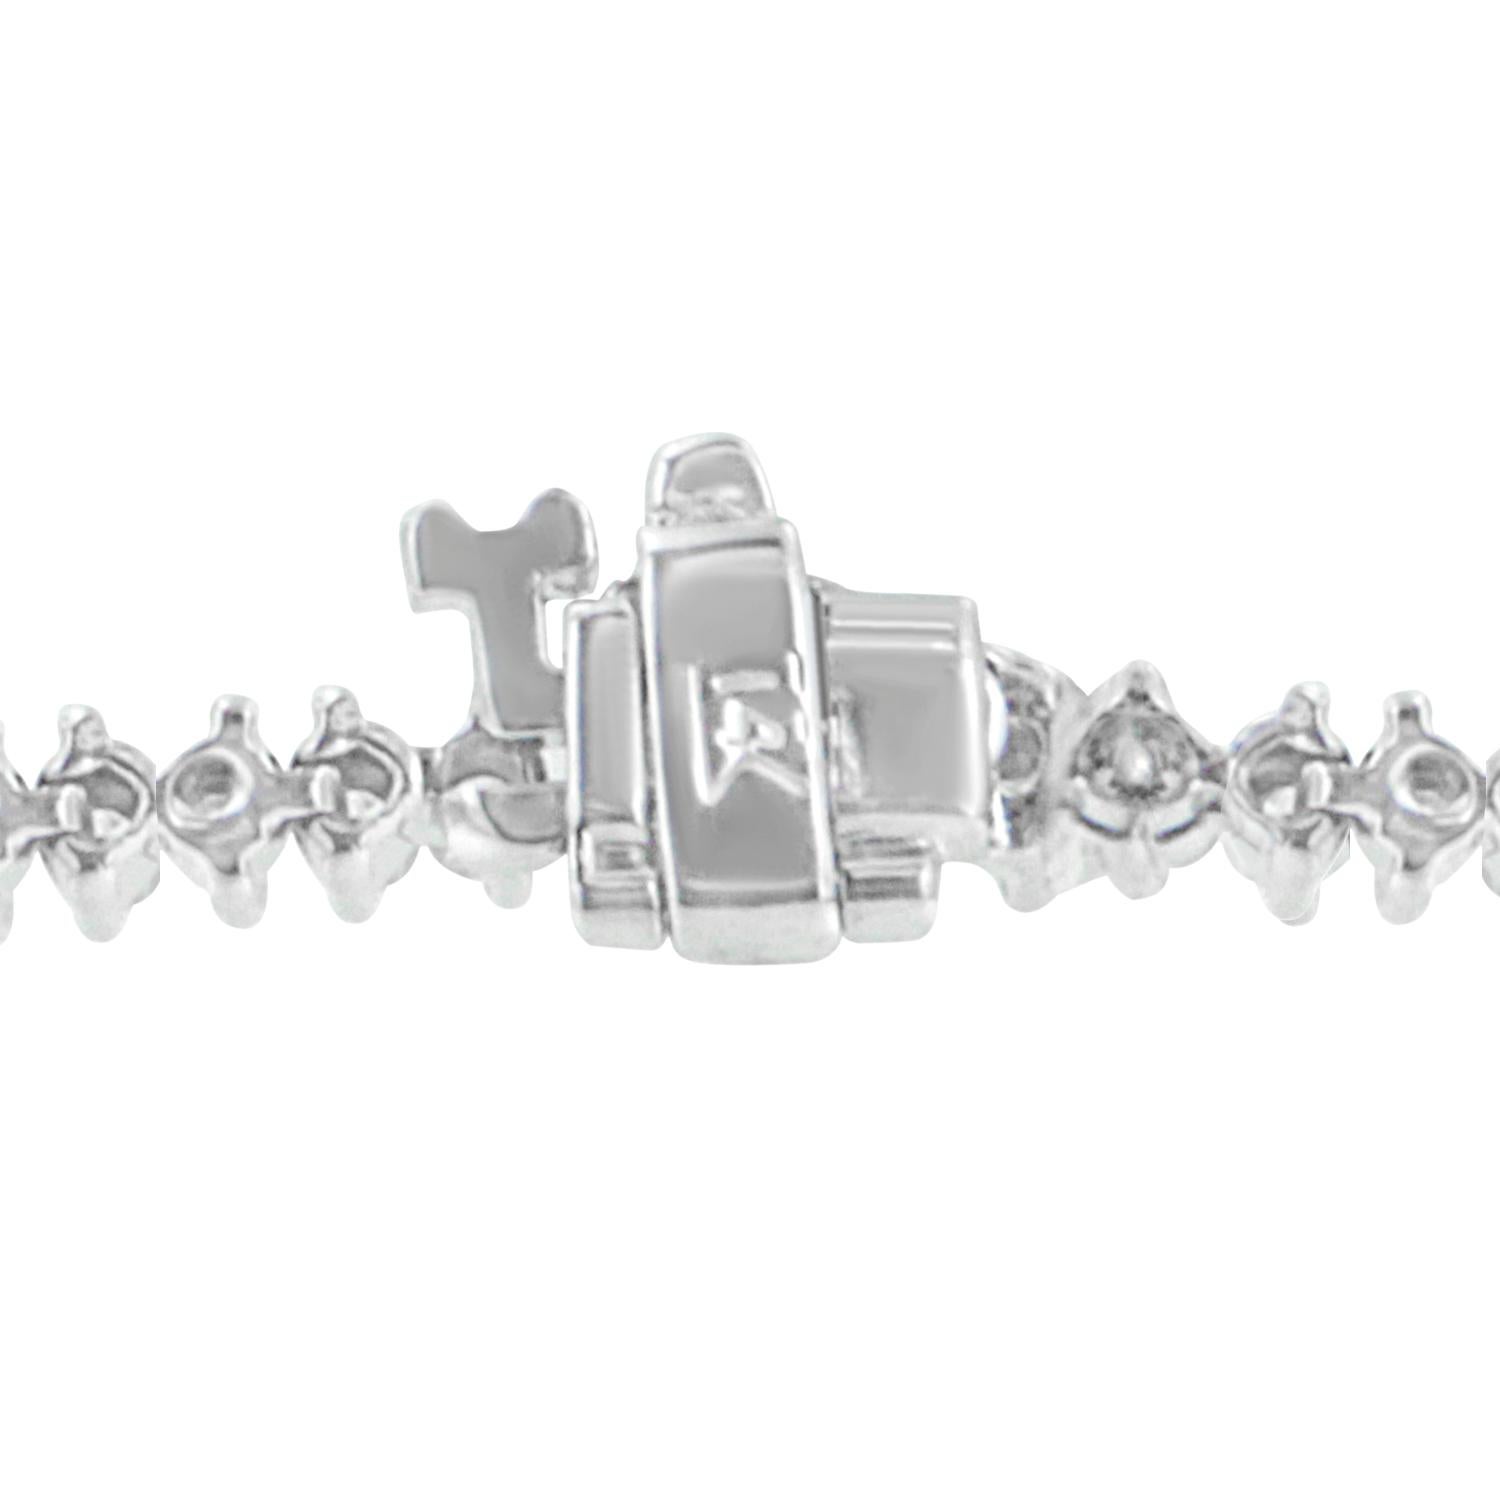 Classic round cut diamonds totaling 2 carats are the centerpiece for this beautiful 14 karat white gold bracelet. Featuring a two-prong setting, each stone sparkles as bright as her smile. Bracelet has 88 natural, round diamonds. Each stone weighs